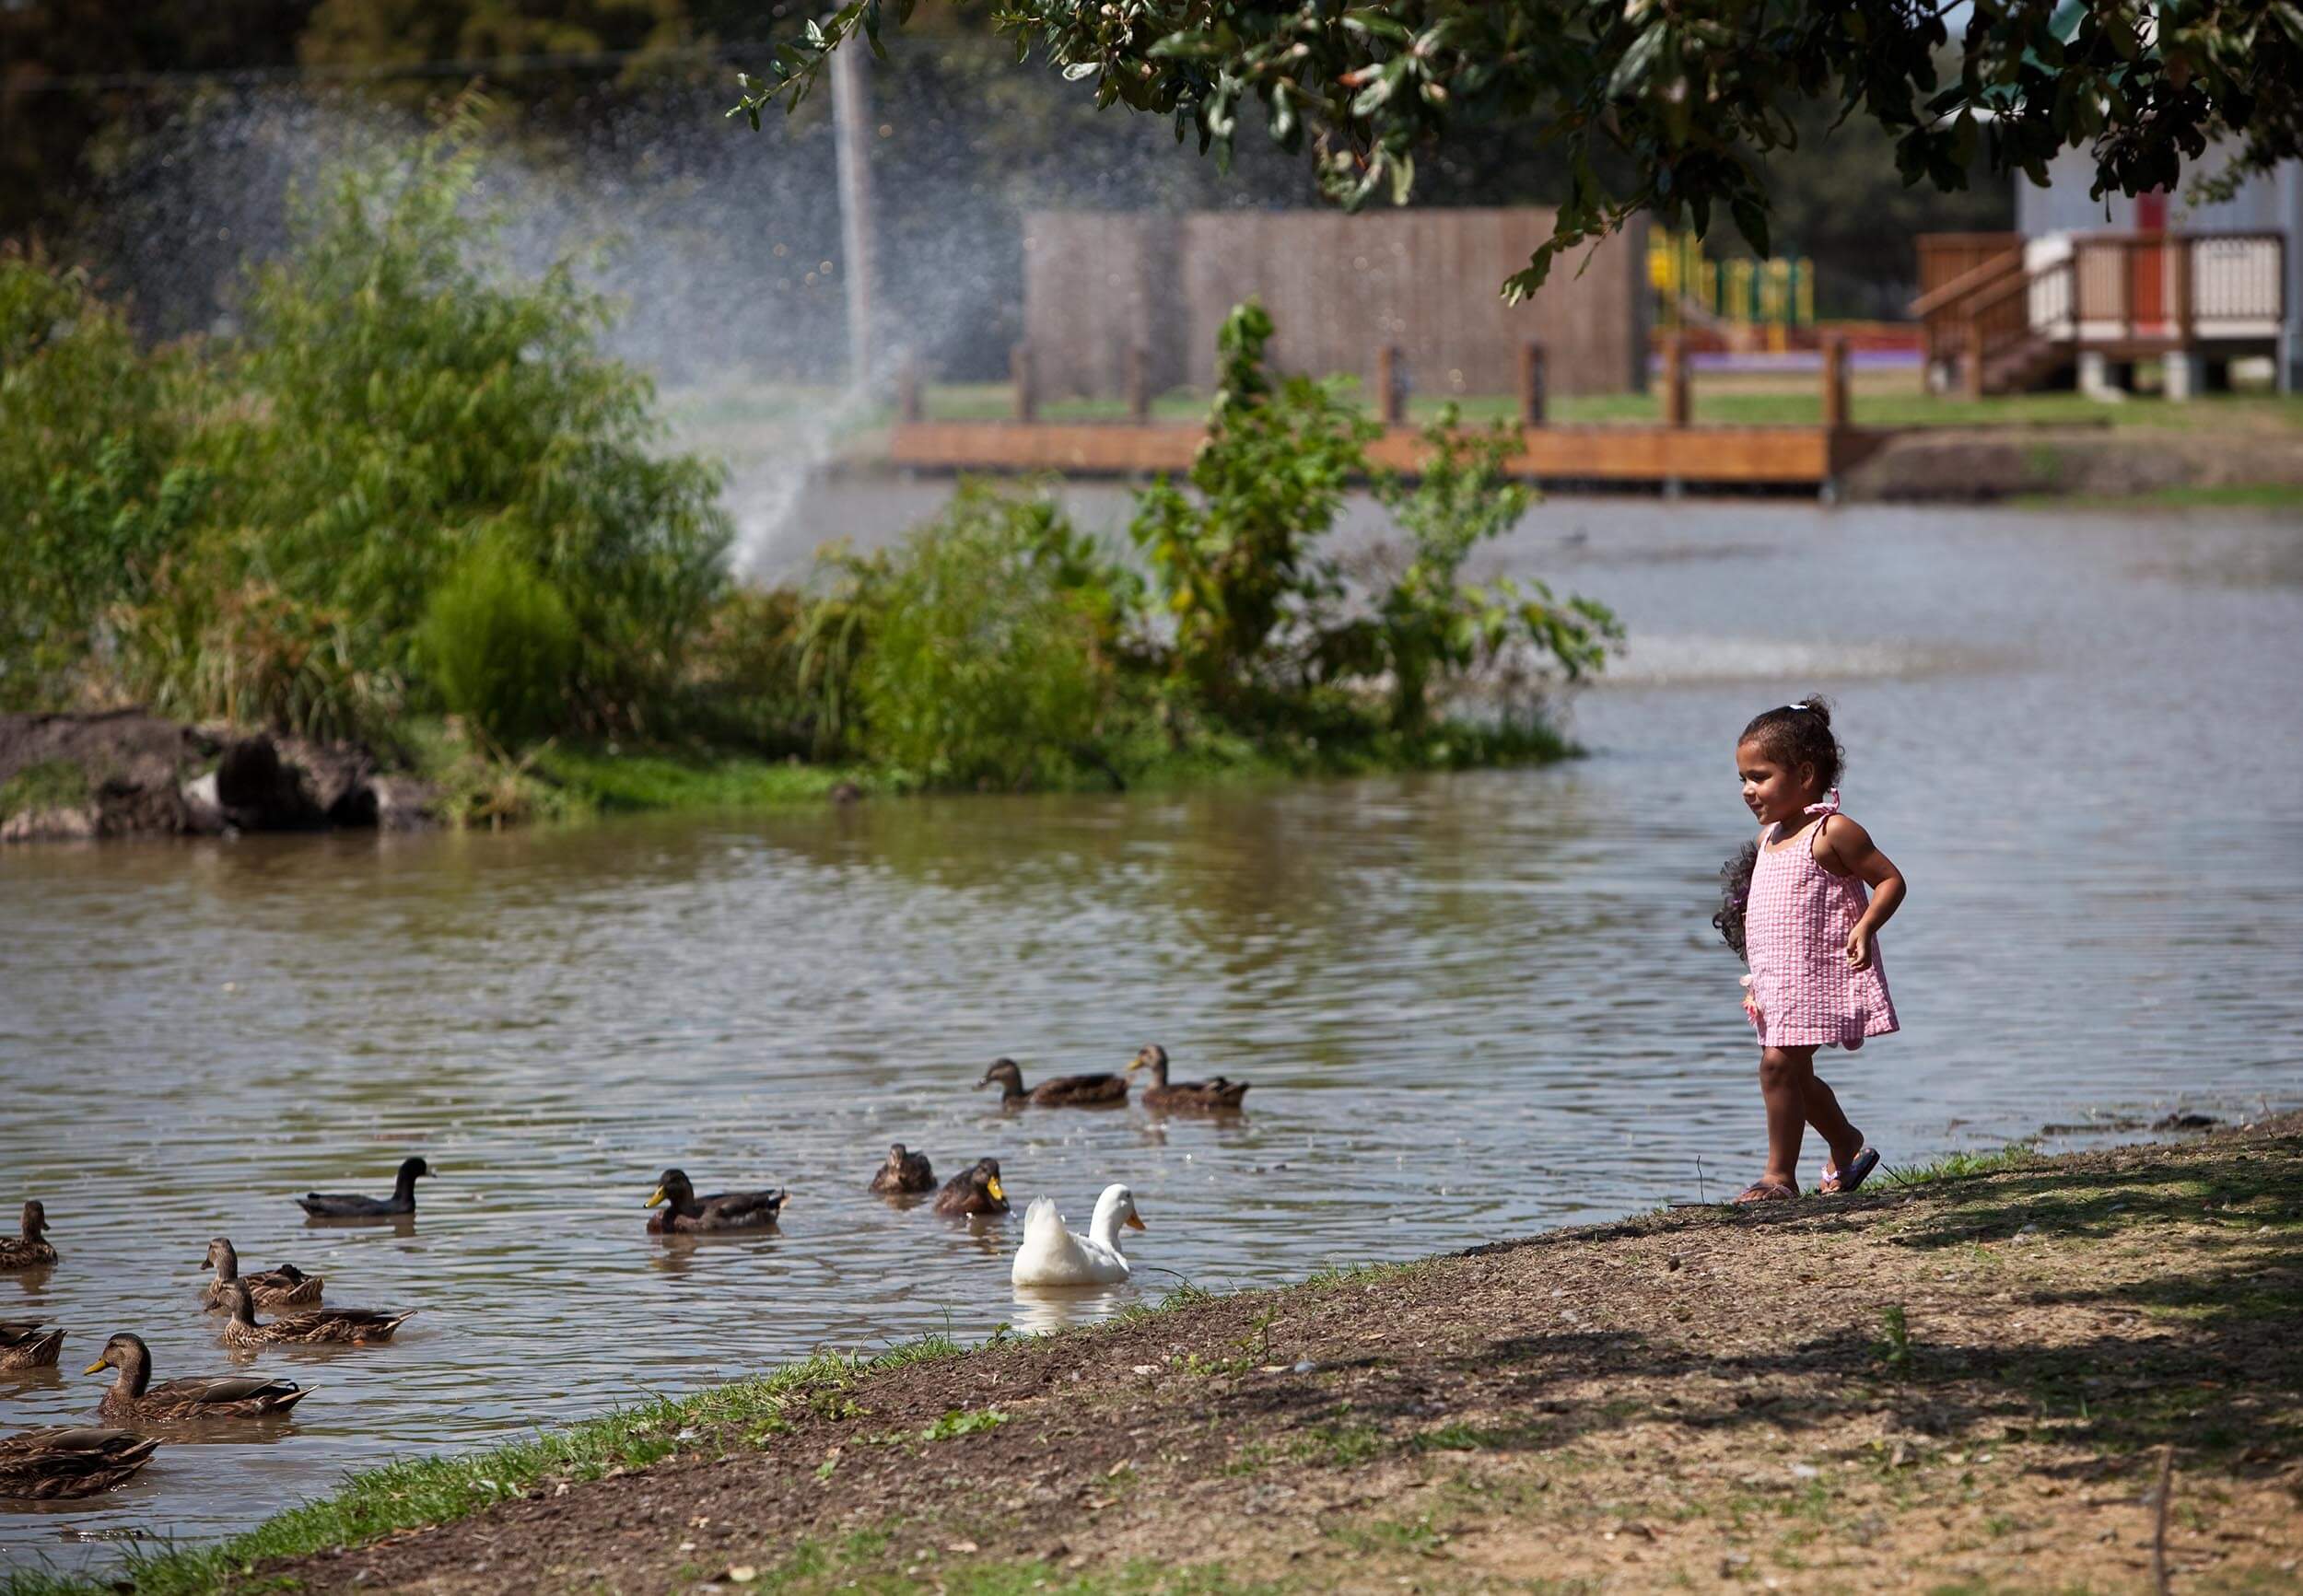 A young girl feeding ducks in a pond in greater New Orleans, LA